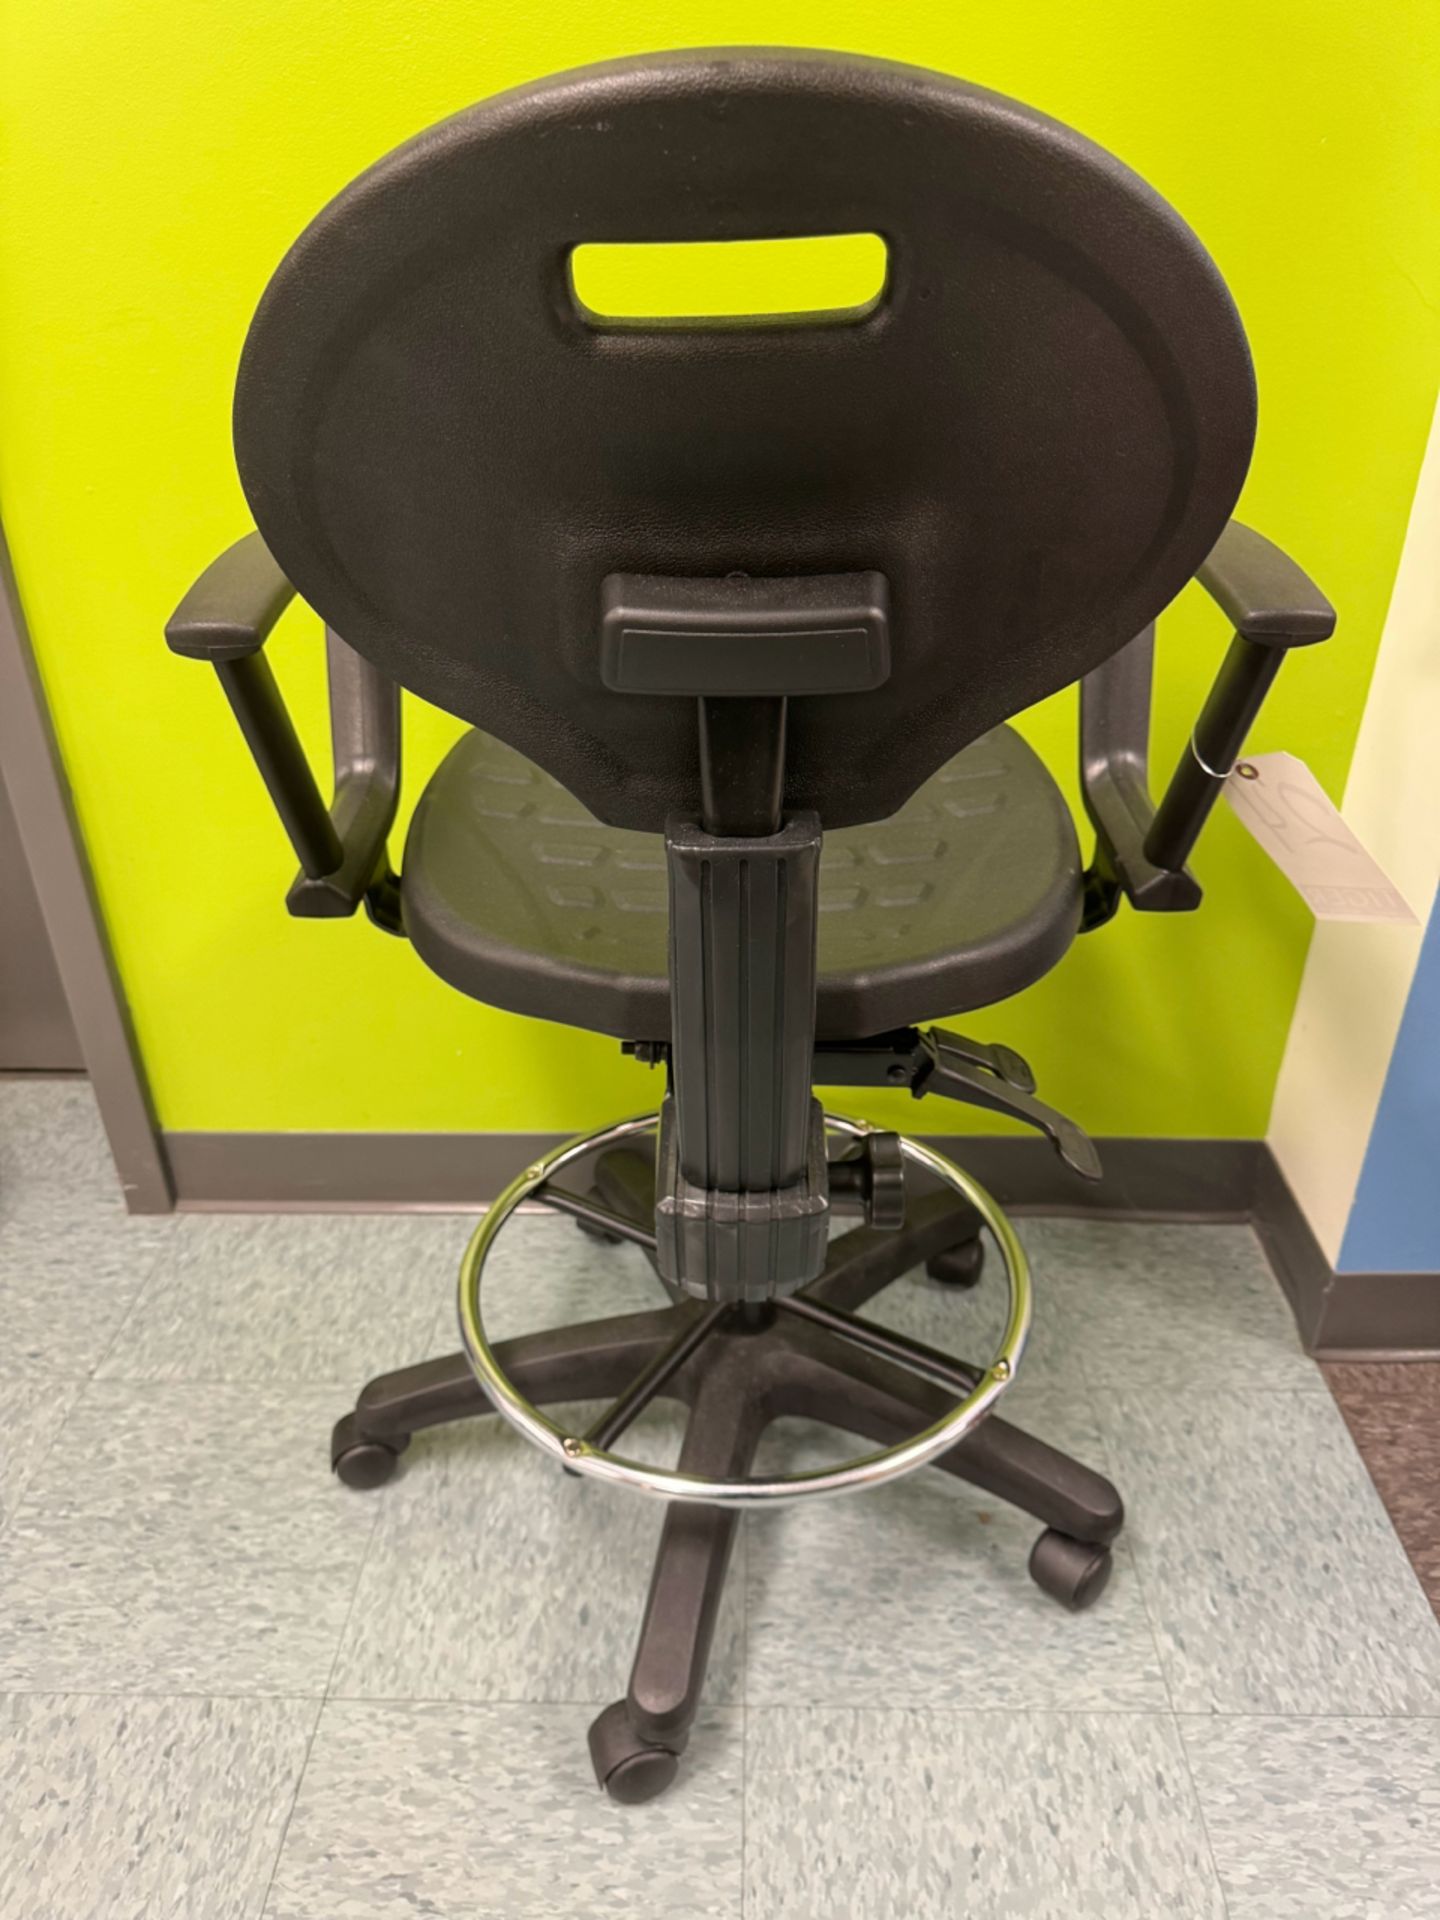 Adjustable Rolling Lab Chair - Image 2 of 2